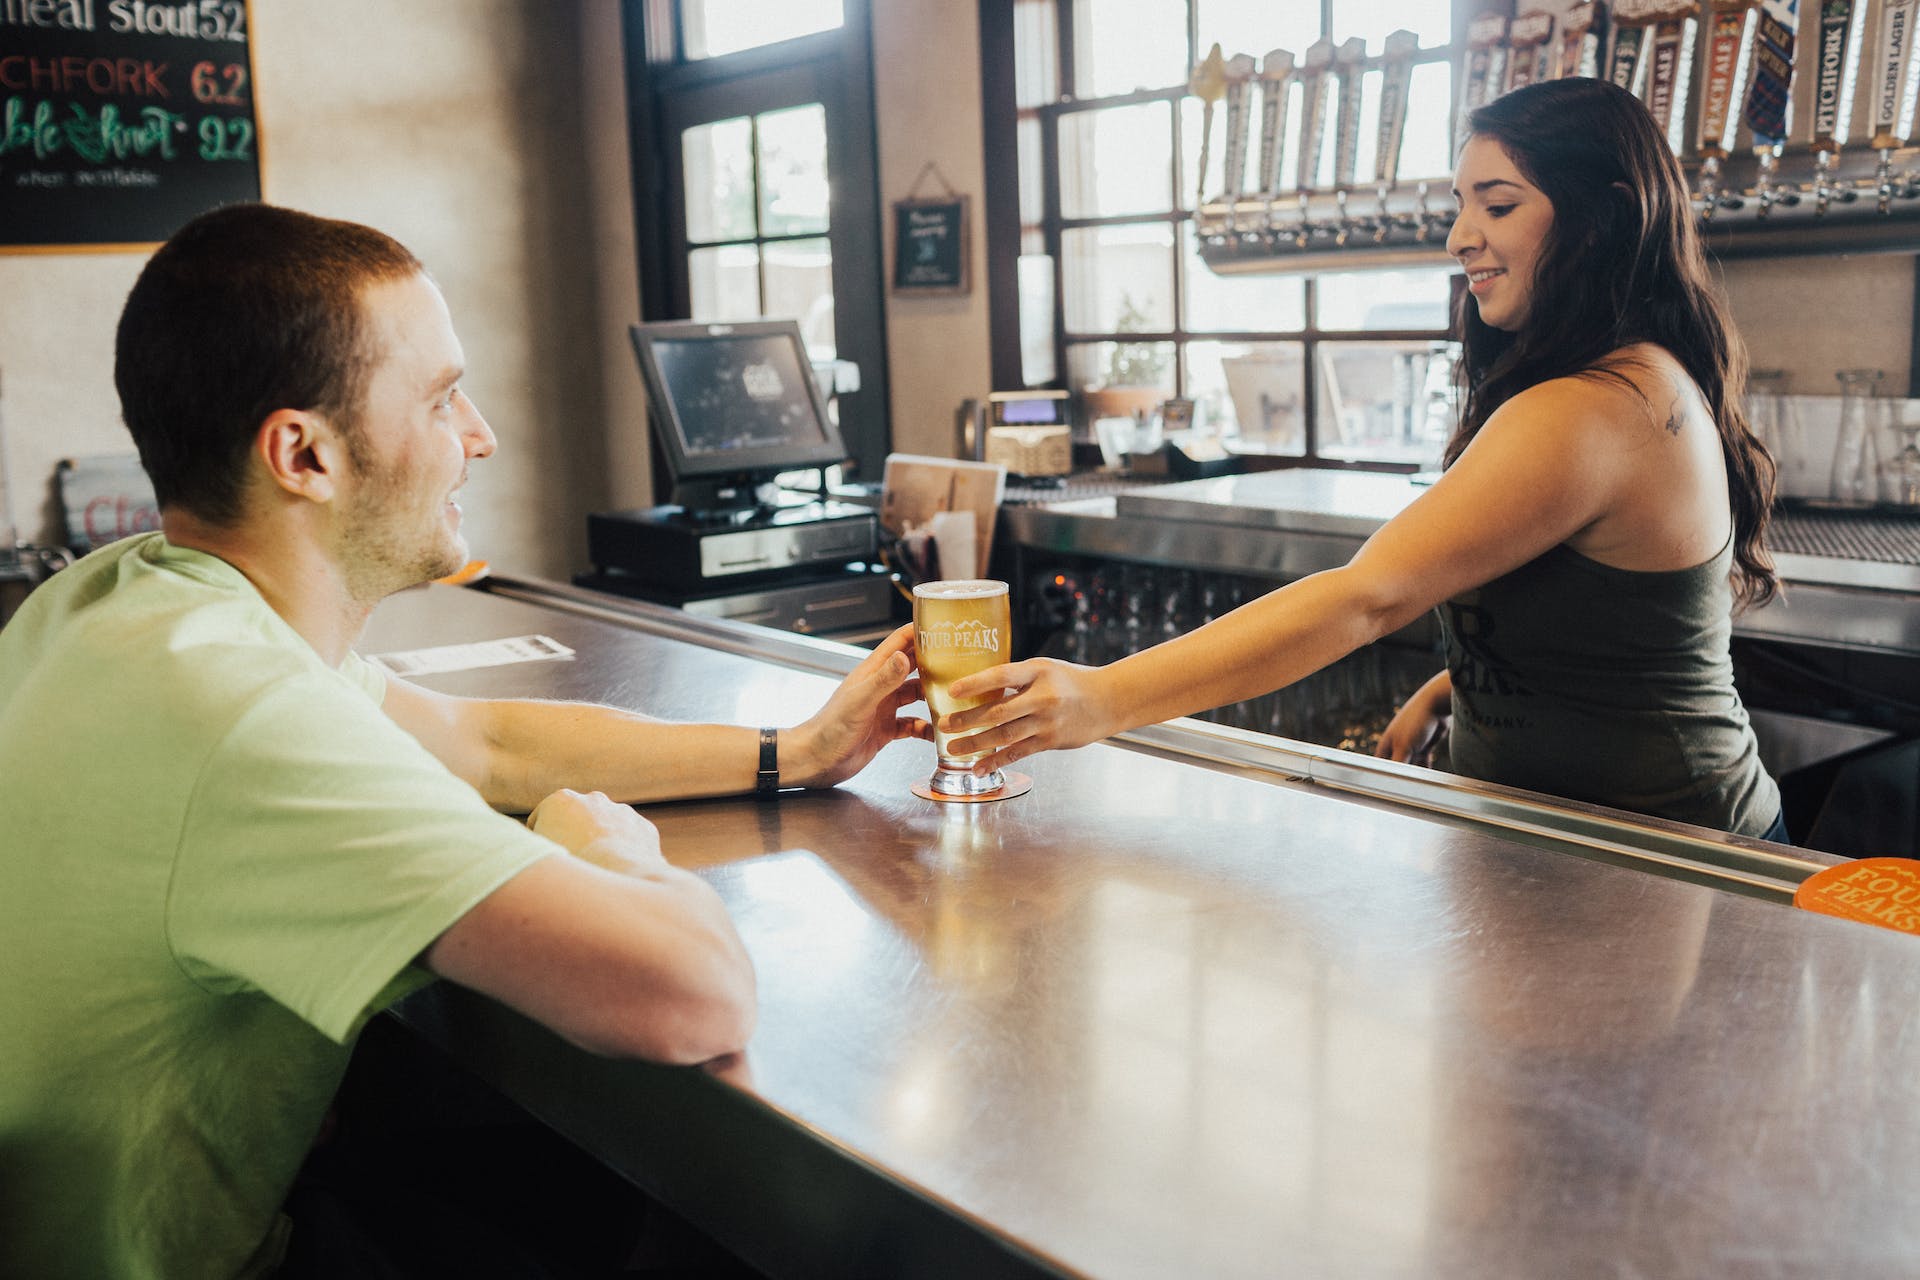 A bartender handing a glass of drink to a male customer | Source: Pexels